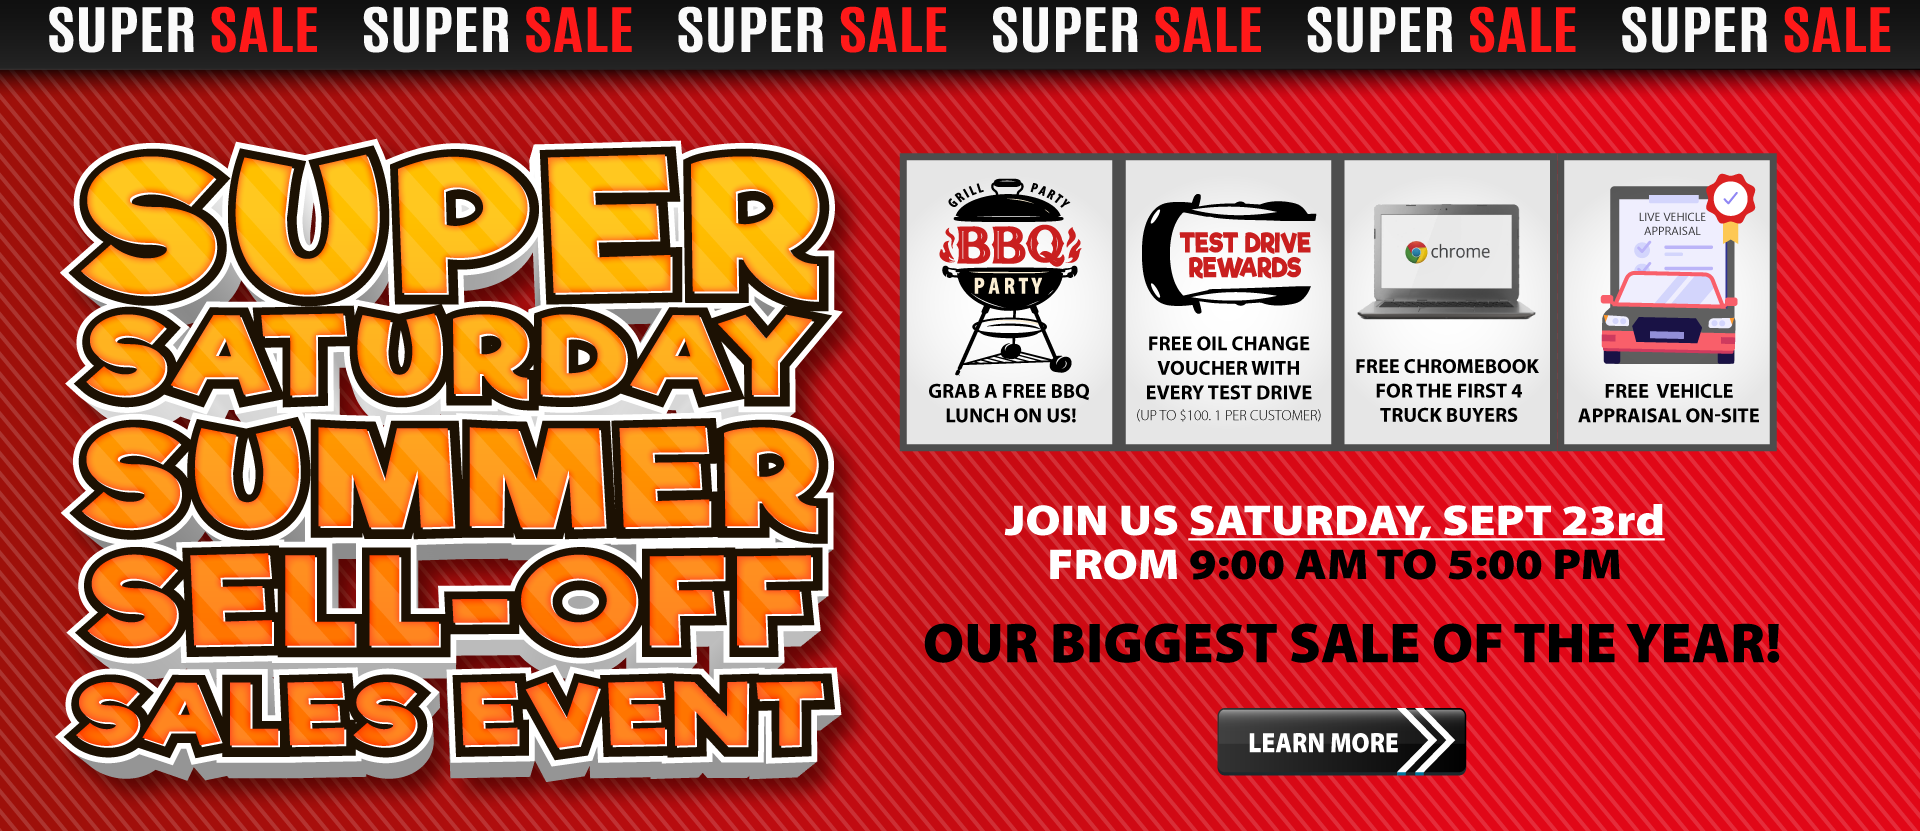 Summer Sell-Off Sales Event Flyer